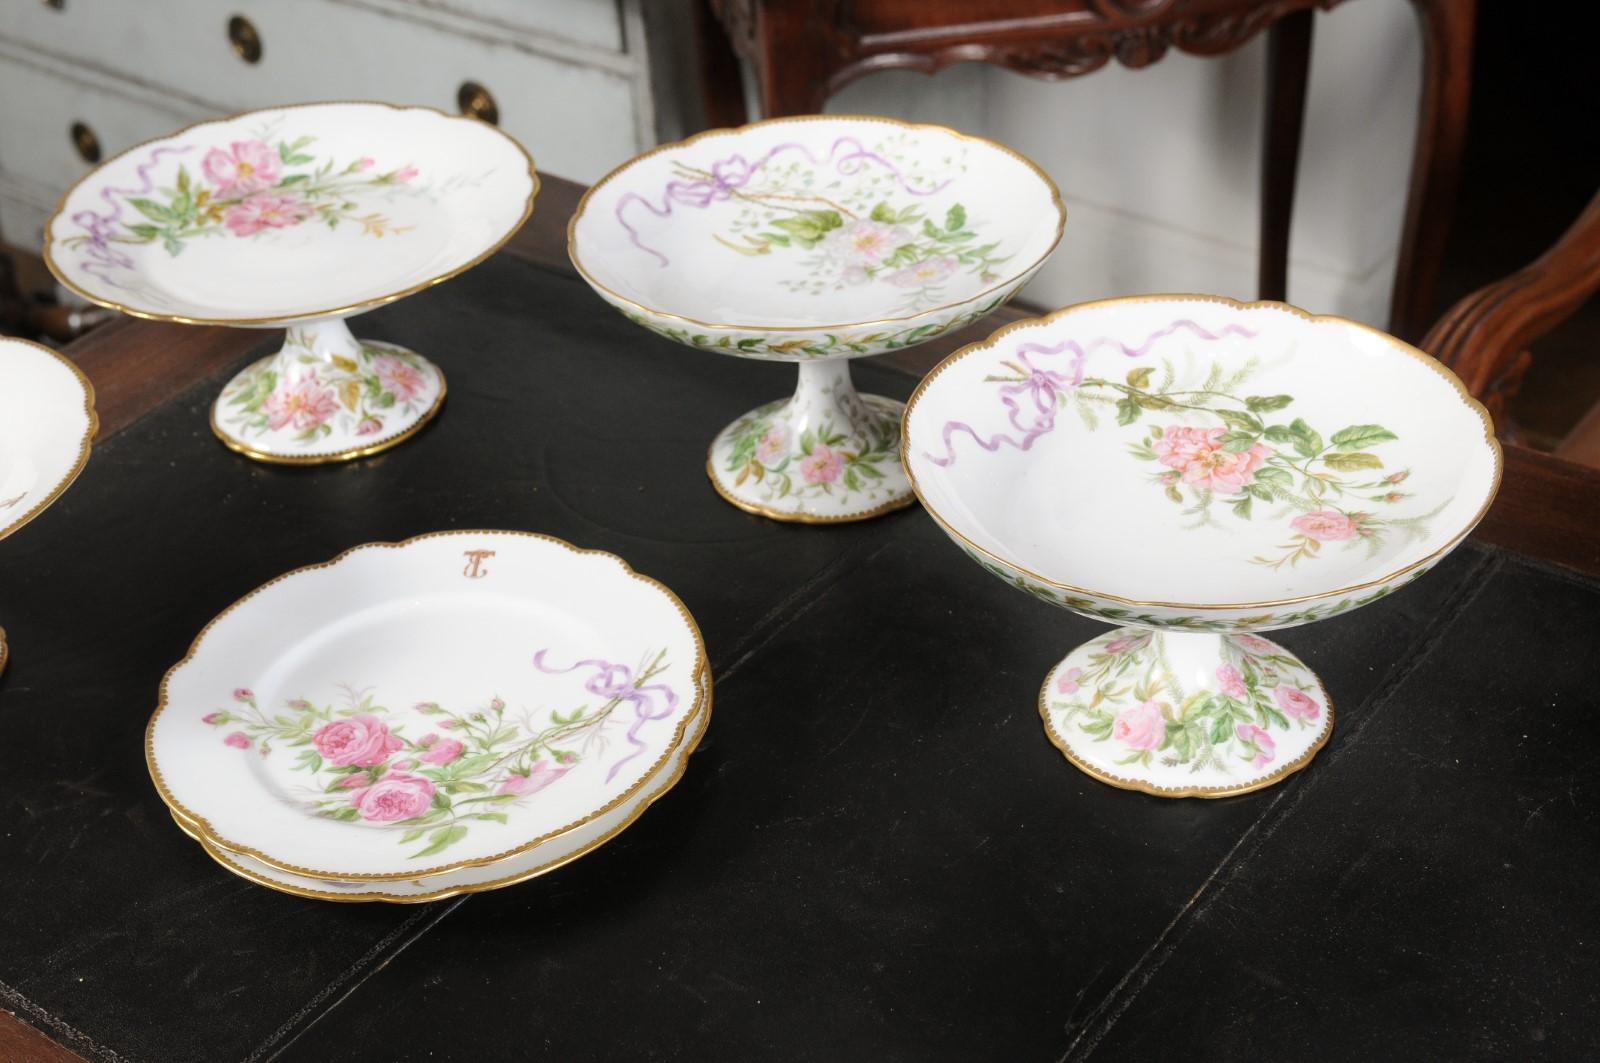 English Porcelain Compotes and Plates with Floral Décor and Gilt Trim 1